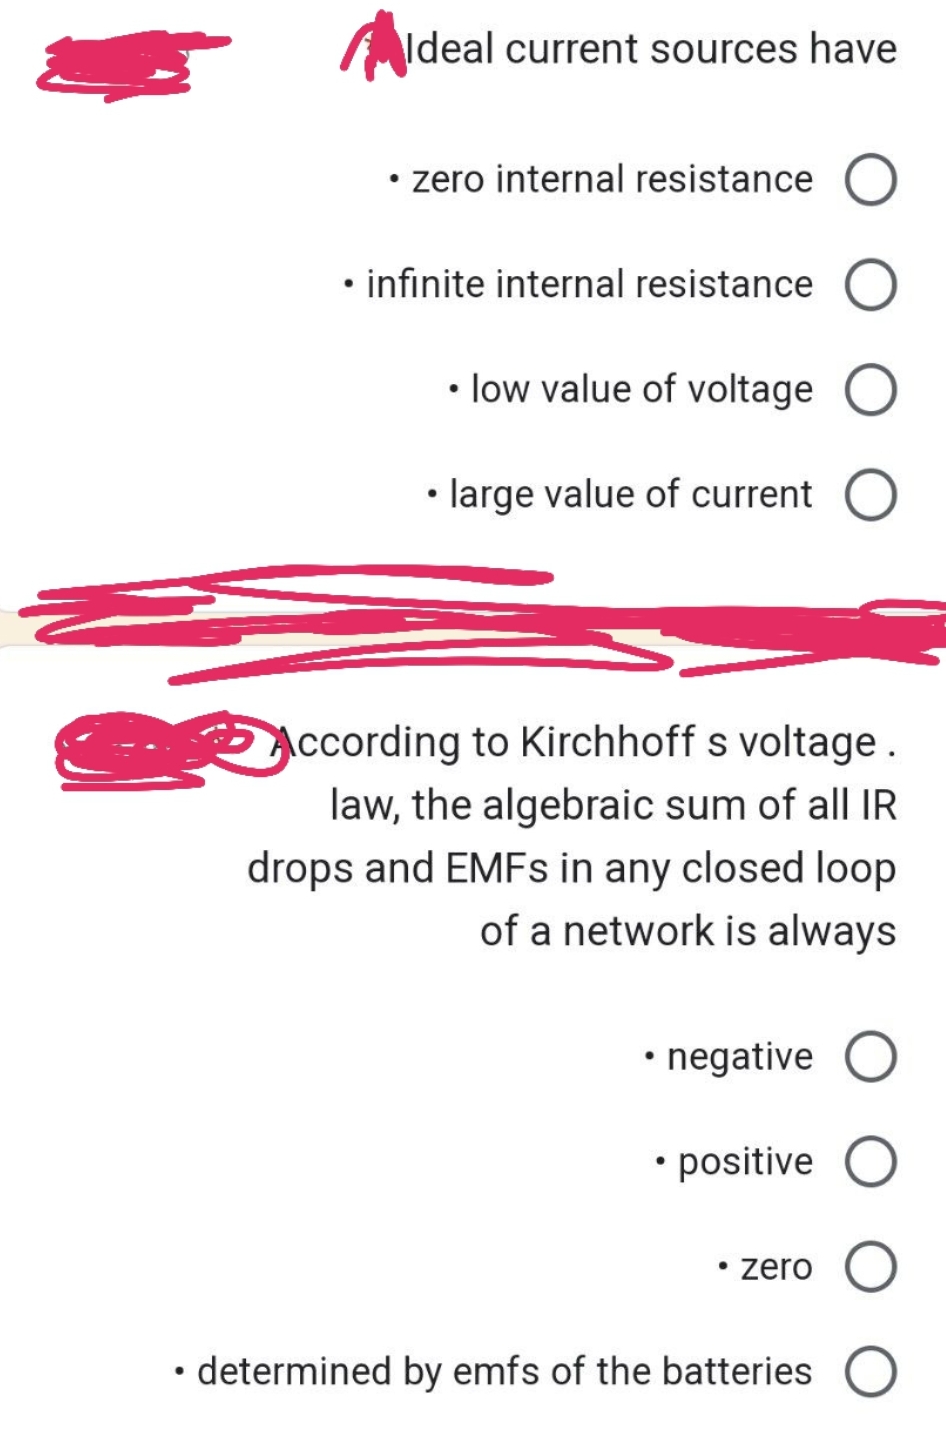 Ideal current sources have
• zero internal resistance
• infinite internal resistance O
• low value of voltage O
• large value of current O
According to Kirchhoff s voltage.
law, the algebraic sum of all IR
drops and EMFs in any closed loop
of a network is always
• negative O
• positive
O
• determined by emfs of the batteries O
●
• zero